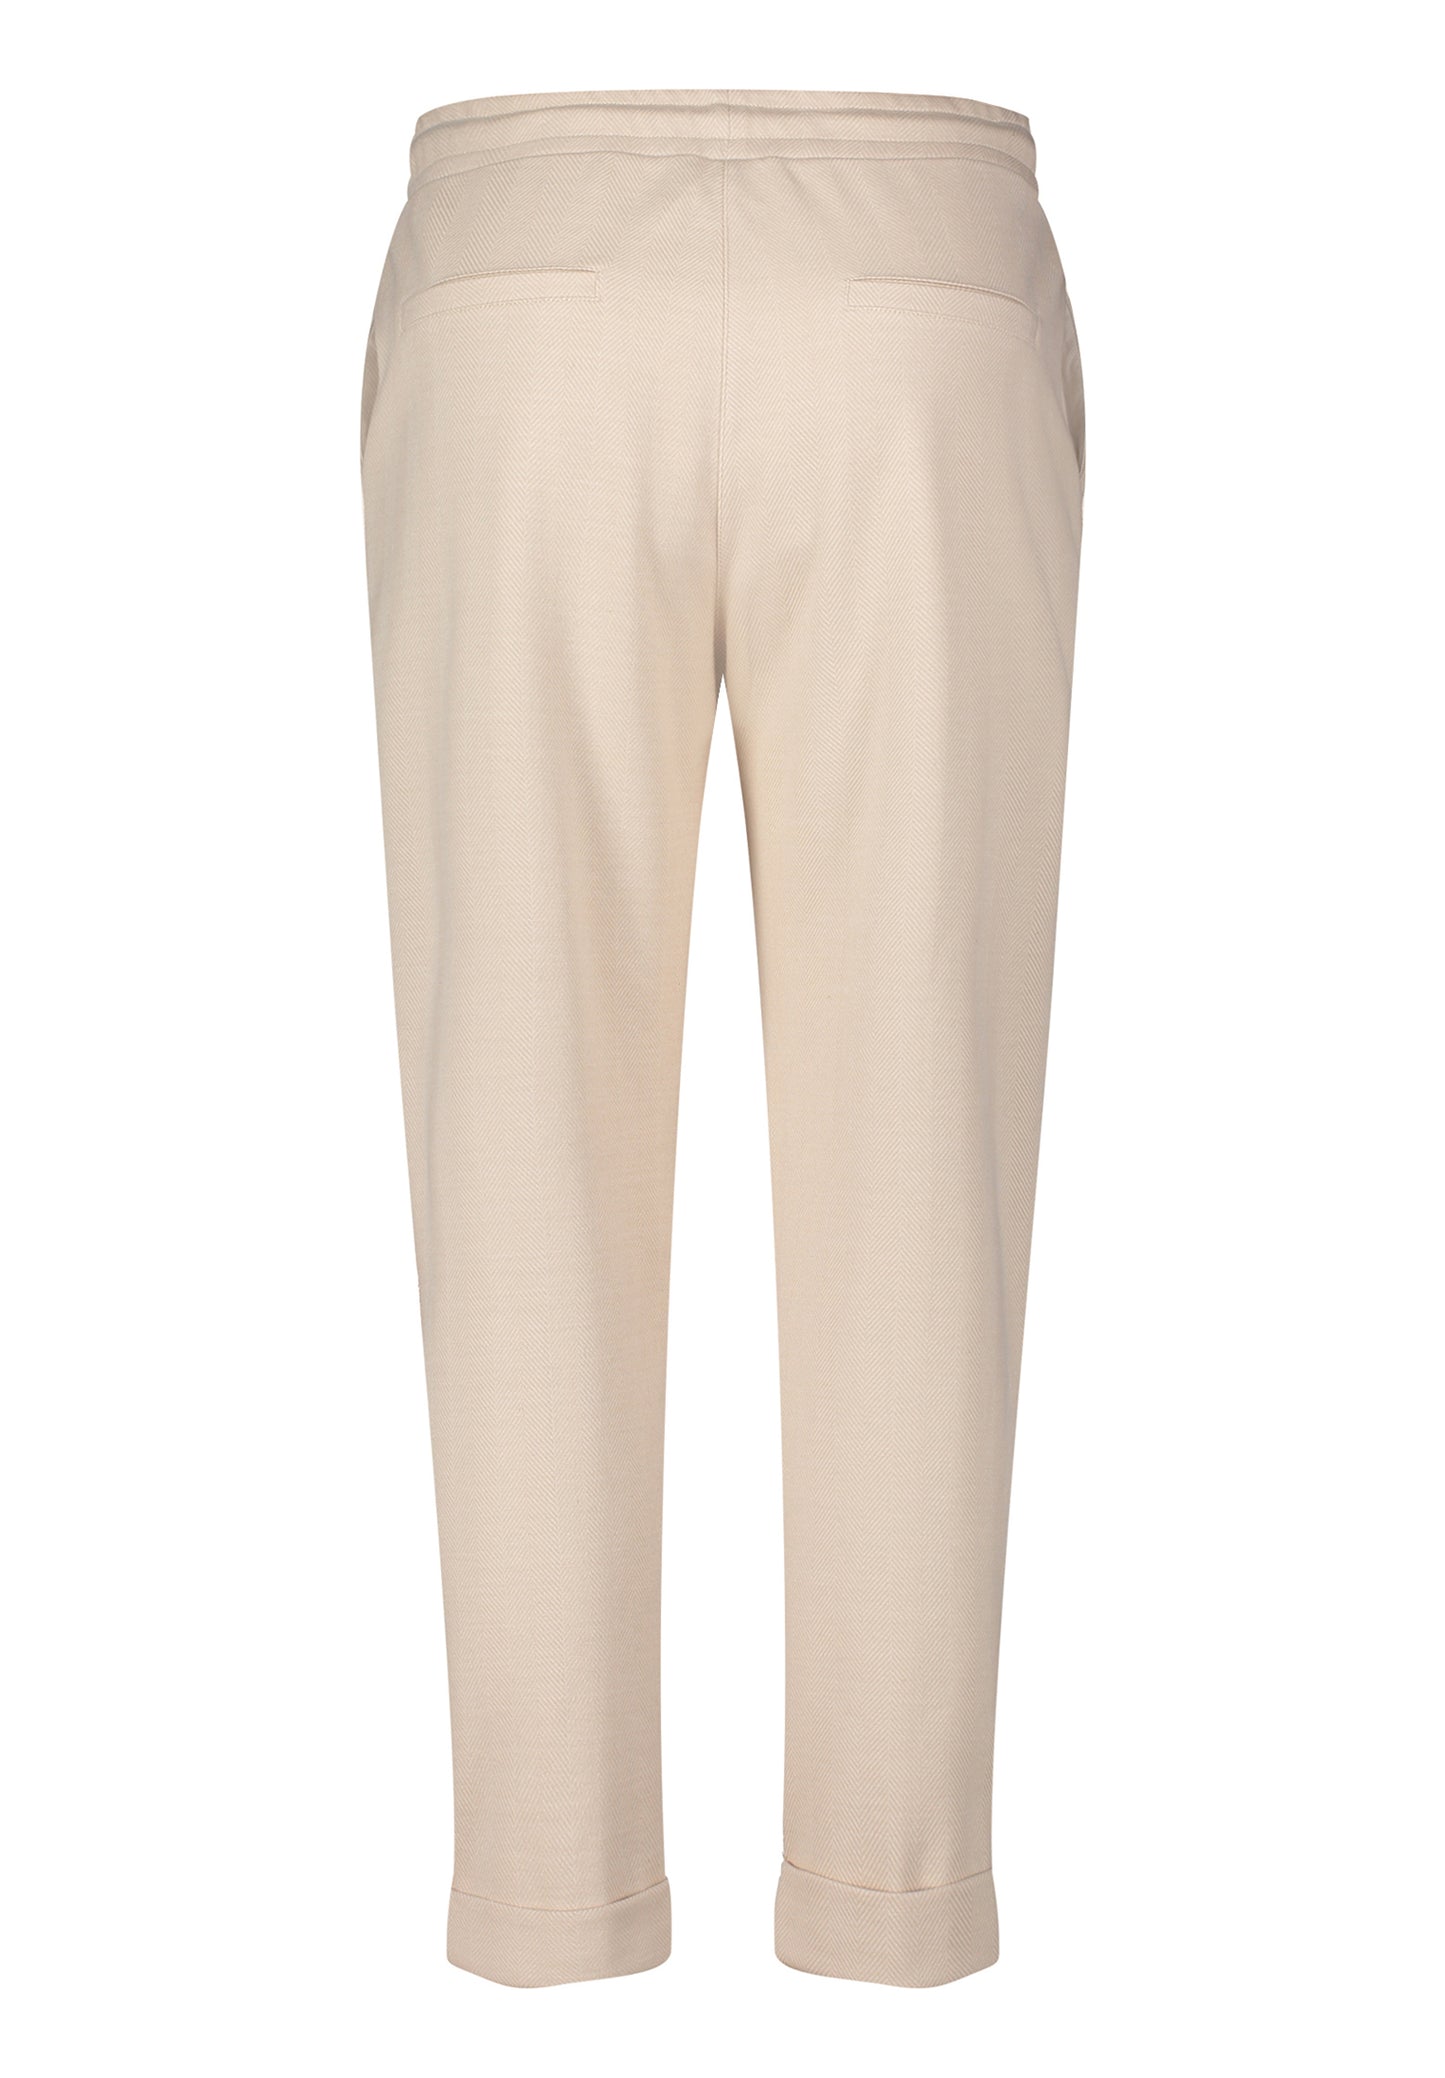 Trousers casual 7/8 length